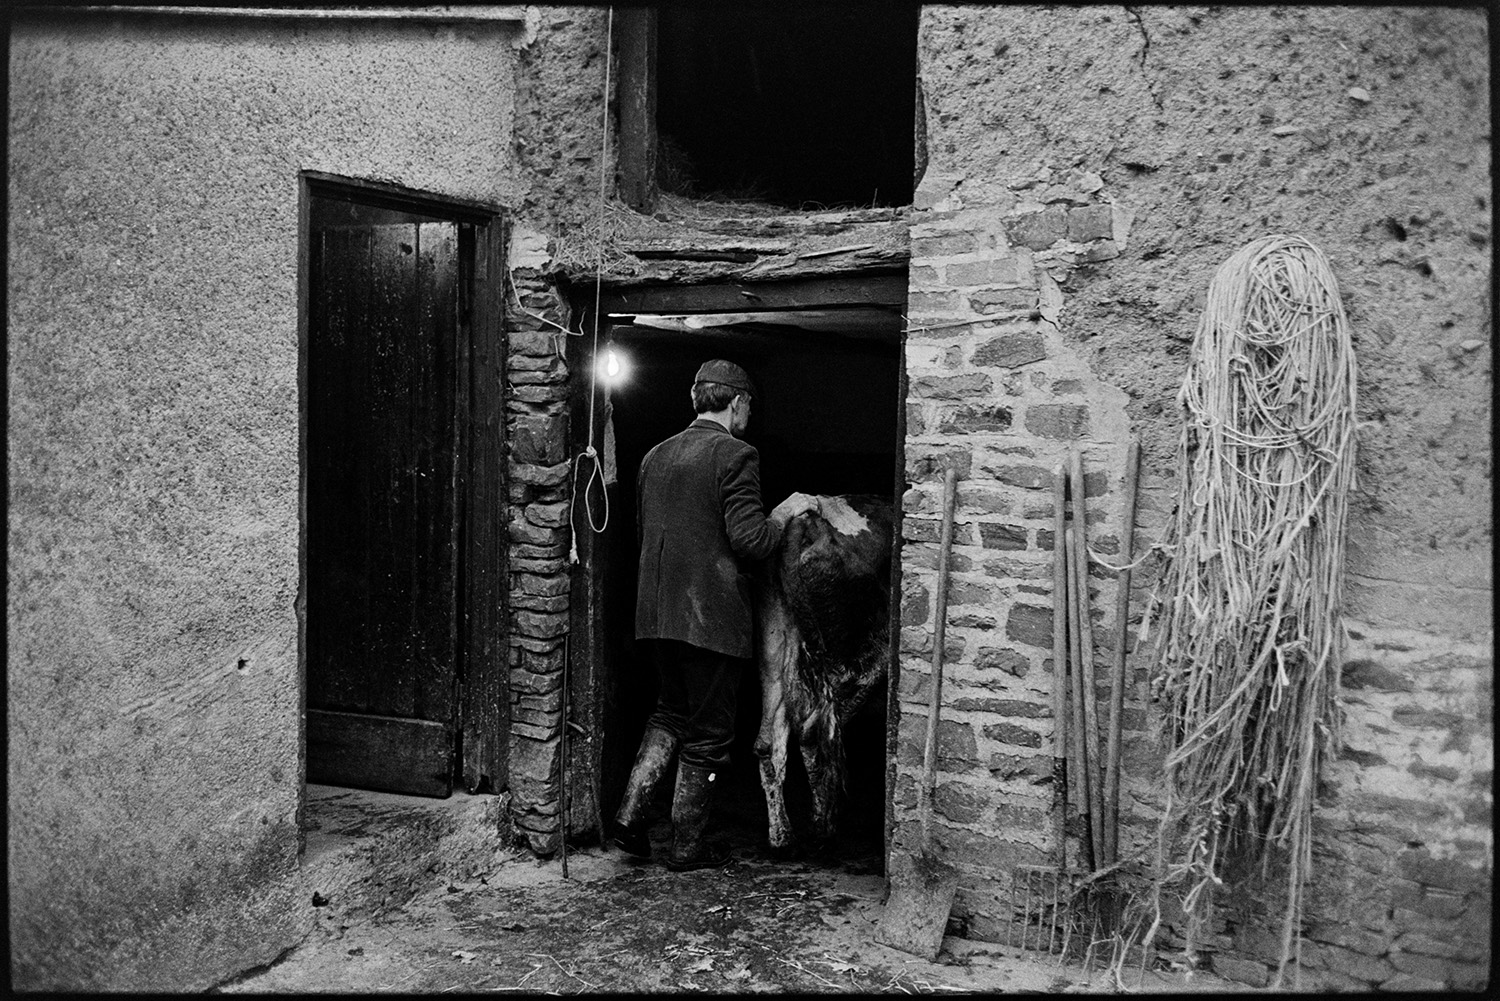 Farmer putting horned cows in barn to be milked. 
[Jim Woolacott herding a cow into the milking parlour at Verdun, Atherington. A light, rope and forks and spade are attached or lent against the cob and brick wall of the milking parlour.]